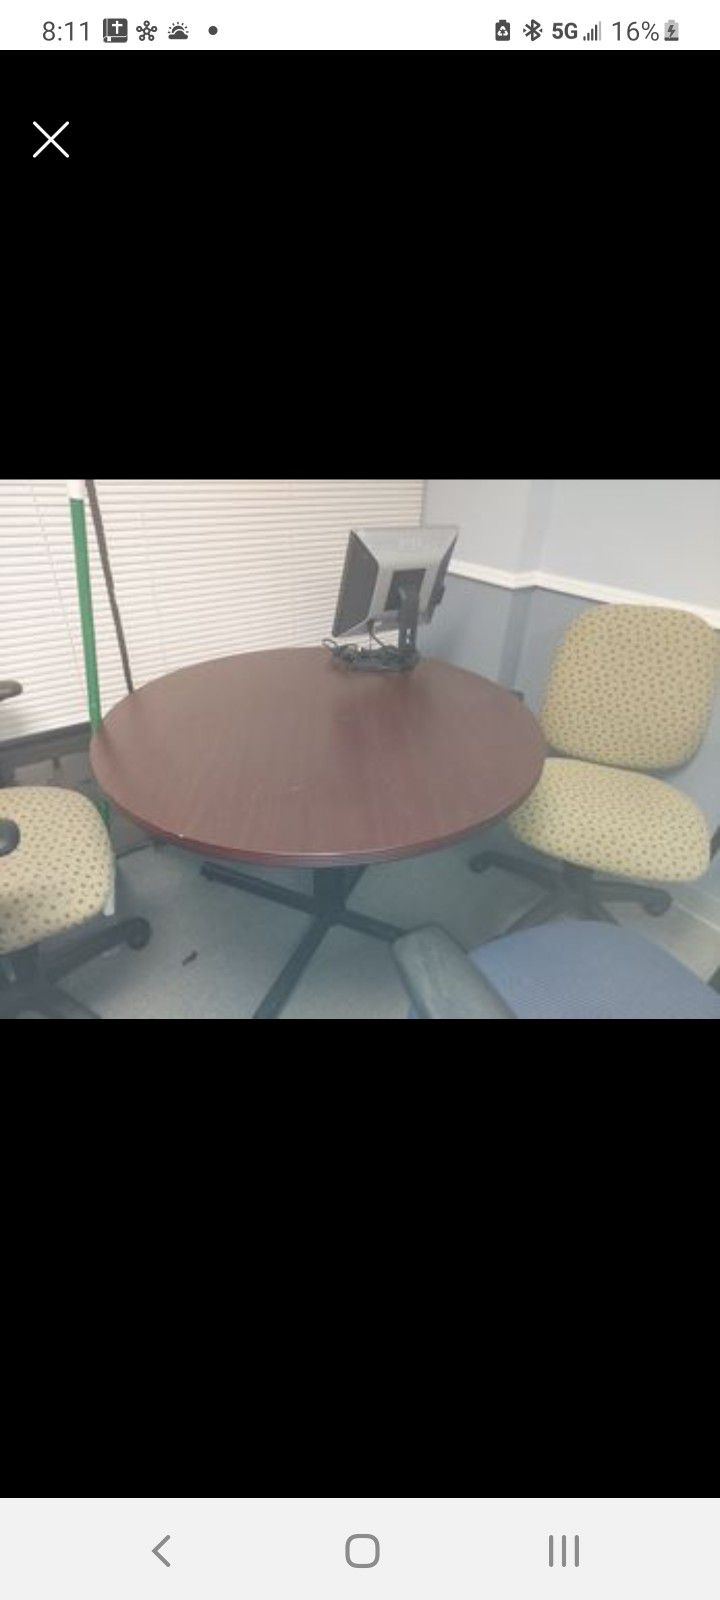 New Price Drop for this 36 inch wooden round cafe table in excellent condition $35 or best reasonable offer